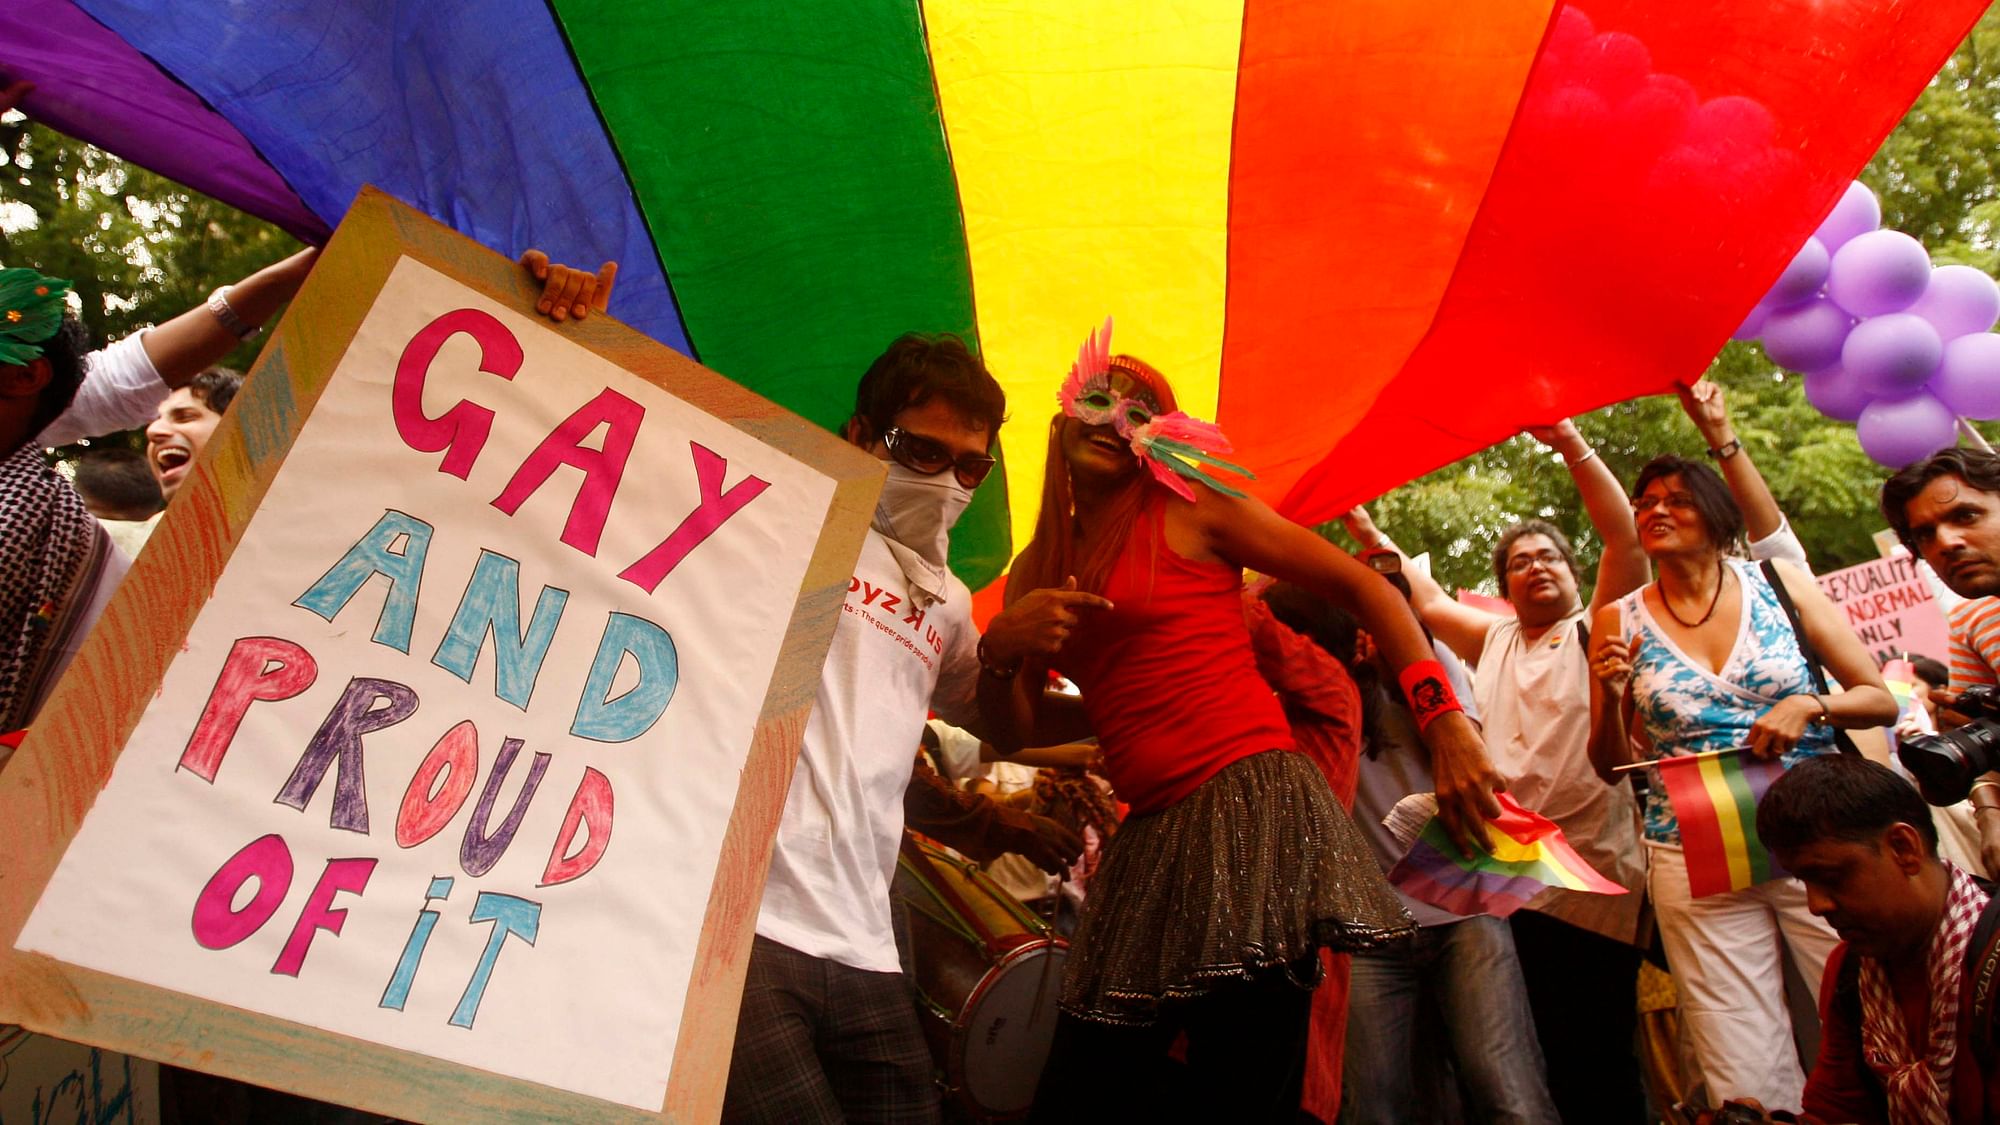 Participants take part in a gay pride march in New Delhi. (Photo: Reuters)